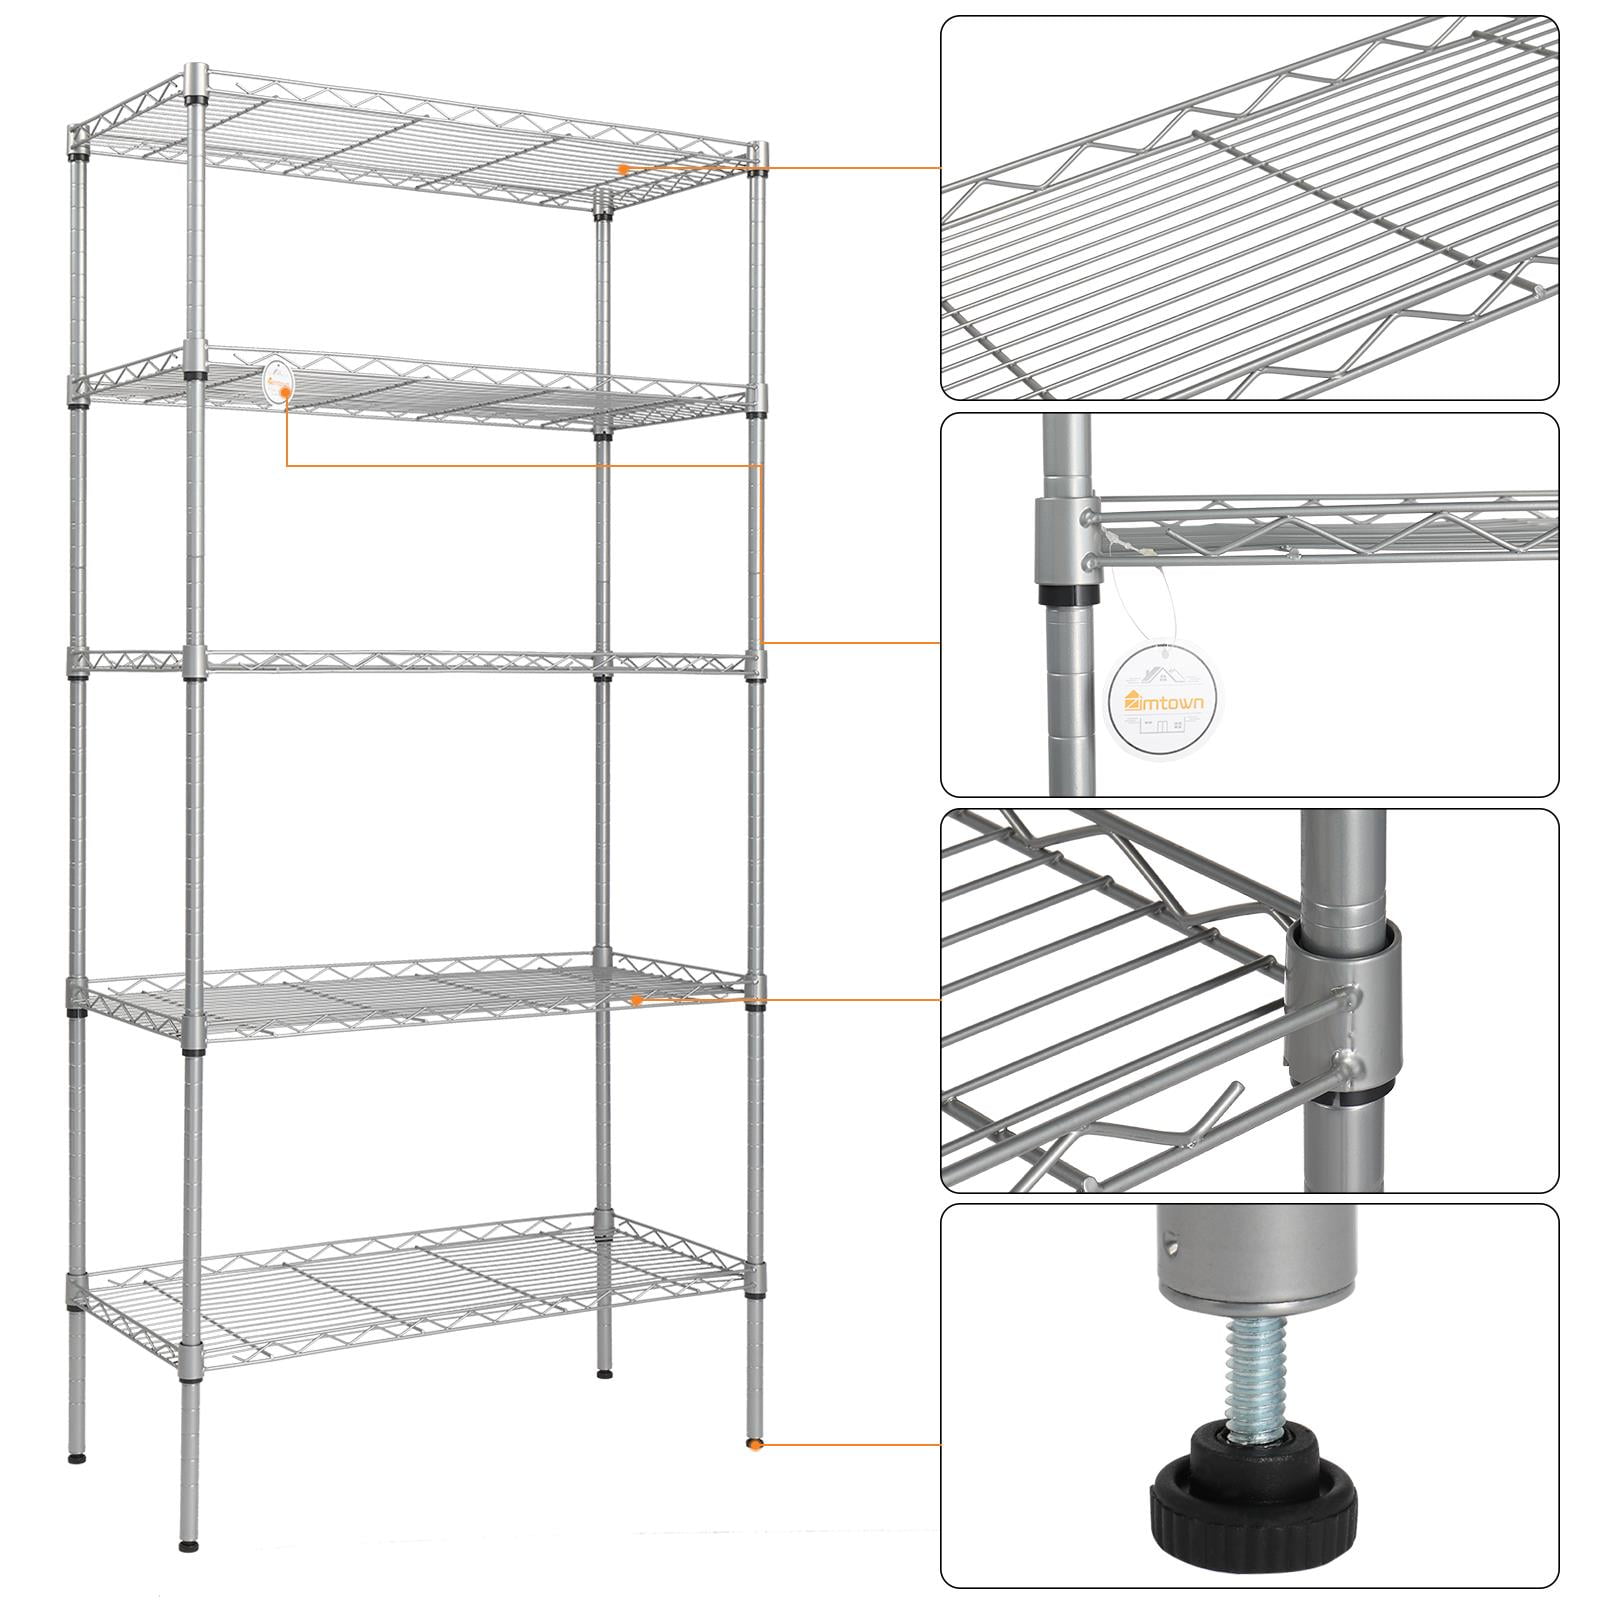 Finnhomy 8-Tier Wire Shelving Unit Adjustable Steel Wire Rack Shelving 8  Shelves Steel Storage Rack or Two 4-Tier Shelving Units with PE mat,  Leveling